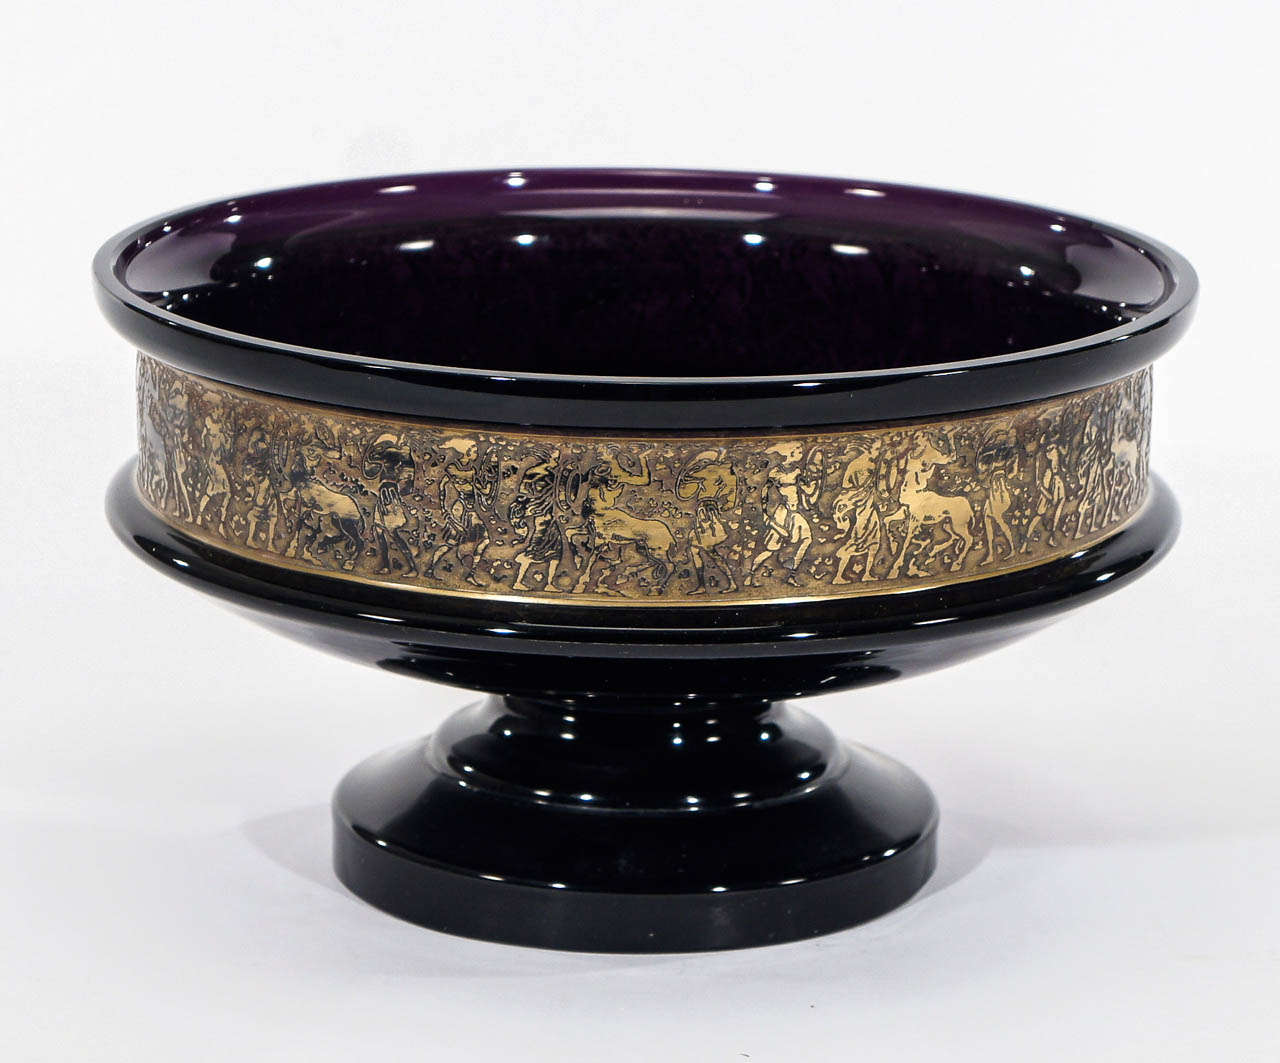 A beautiful example of Moser's Neoclassical designs as represented by this footed amethyst centerpiece. Hand blown deep purple crystal with a well- balanced supportive base, supports this decorative piece. The wide band around the body is decorated